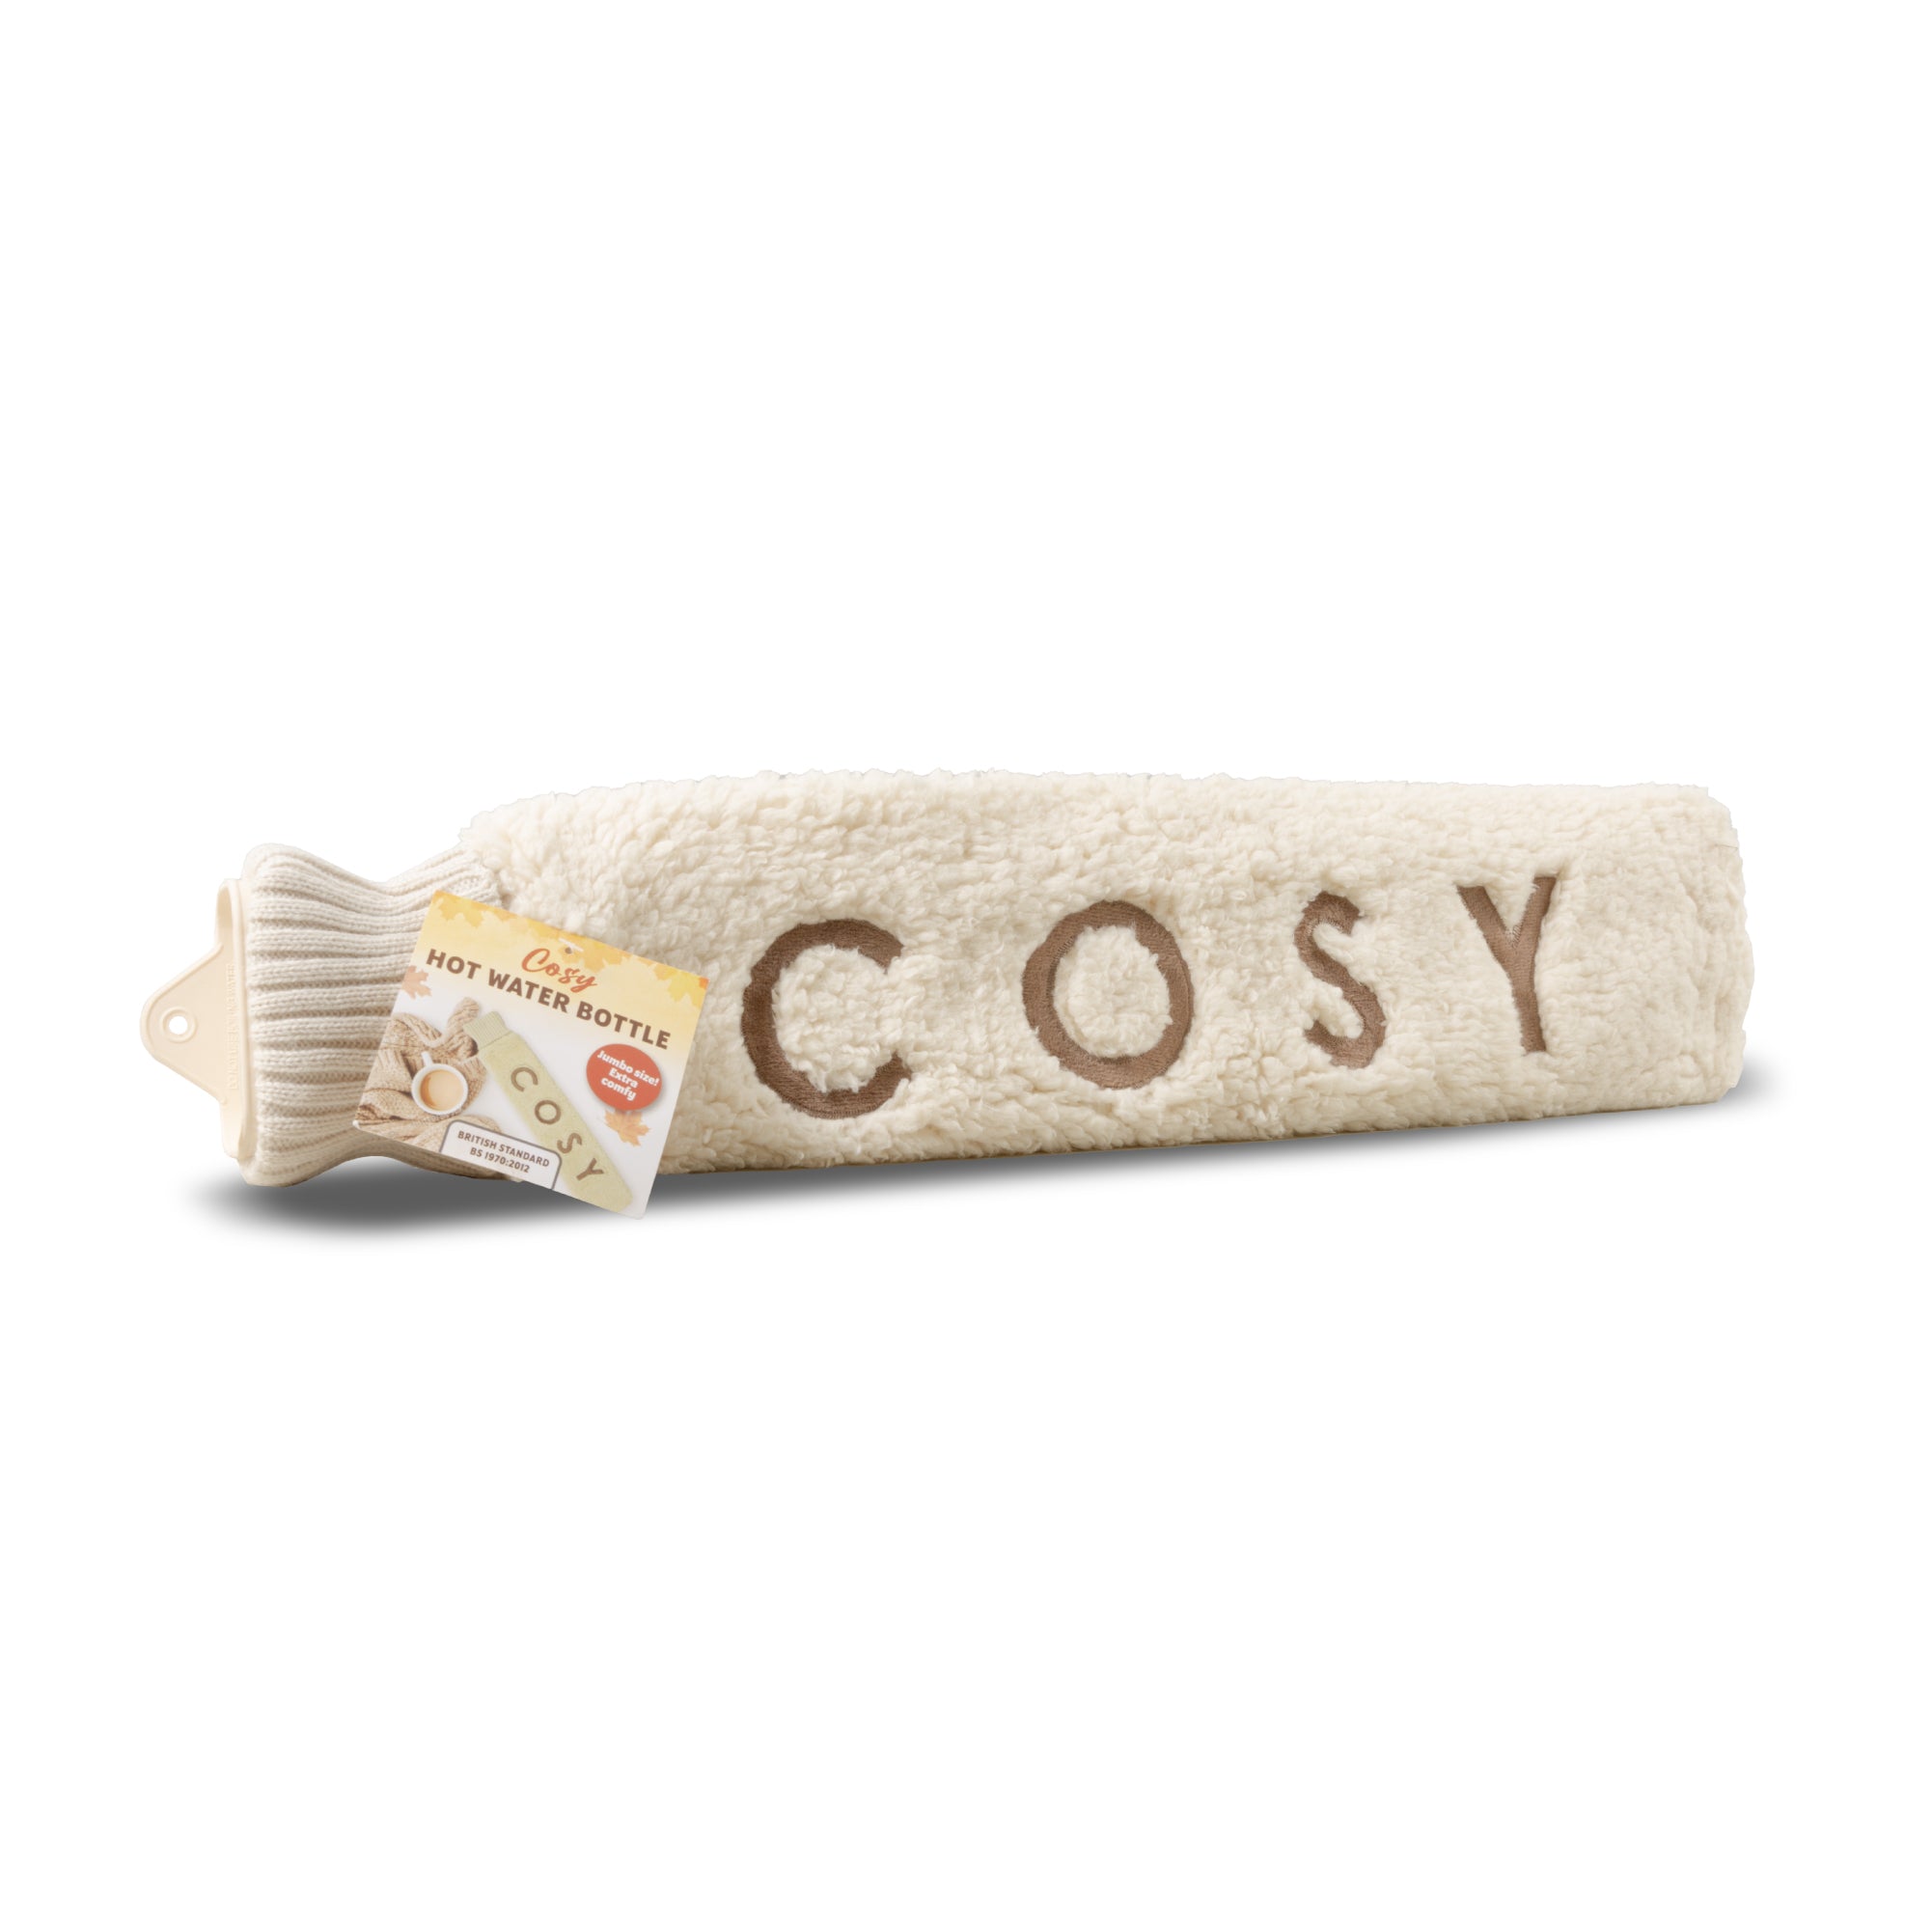 Cosy Hot Water Bottle with Super Soft Fleece - DSL